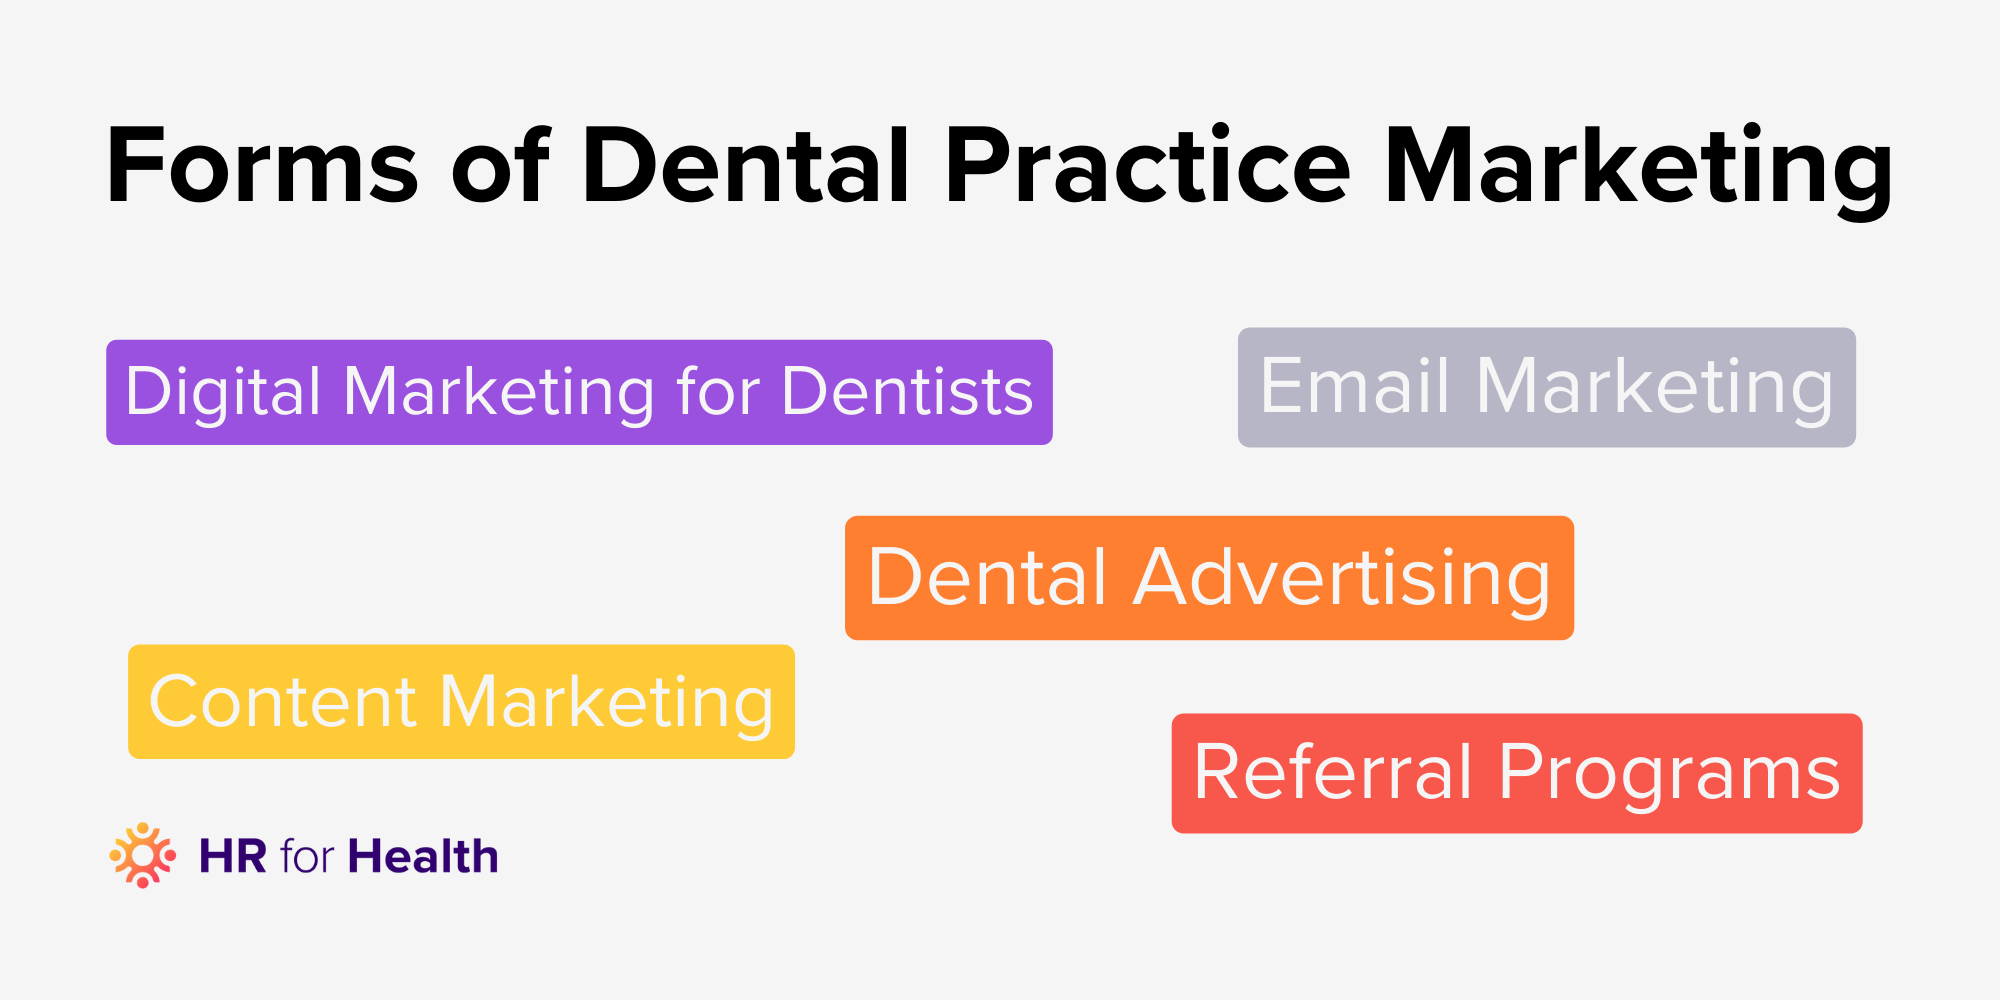 Forms of Dental Practice Marketing